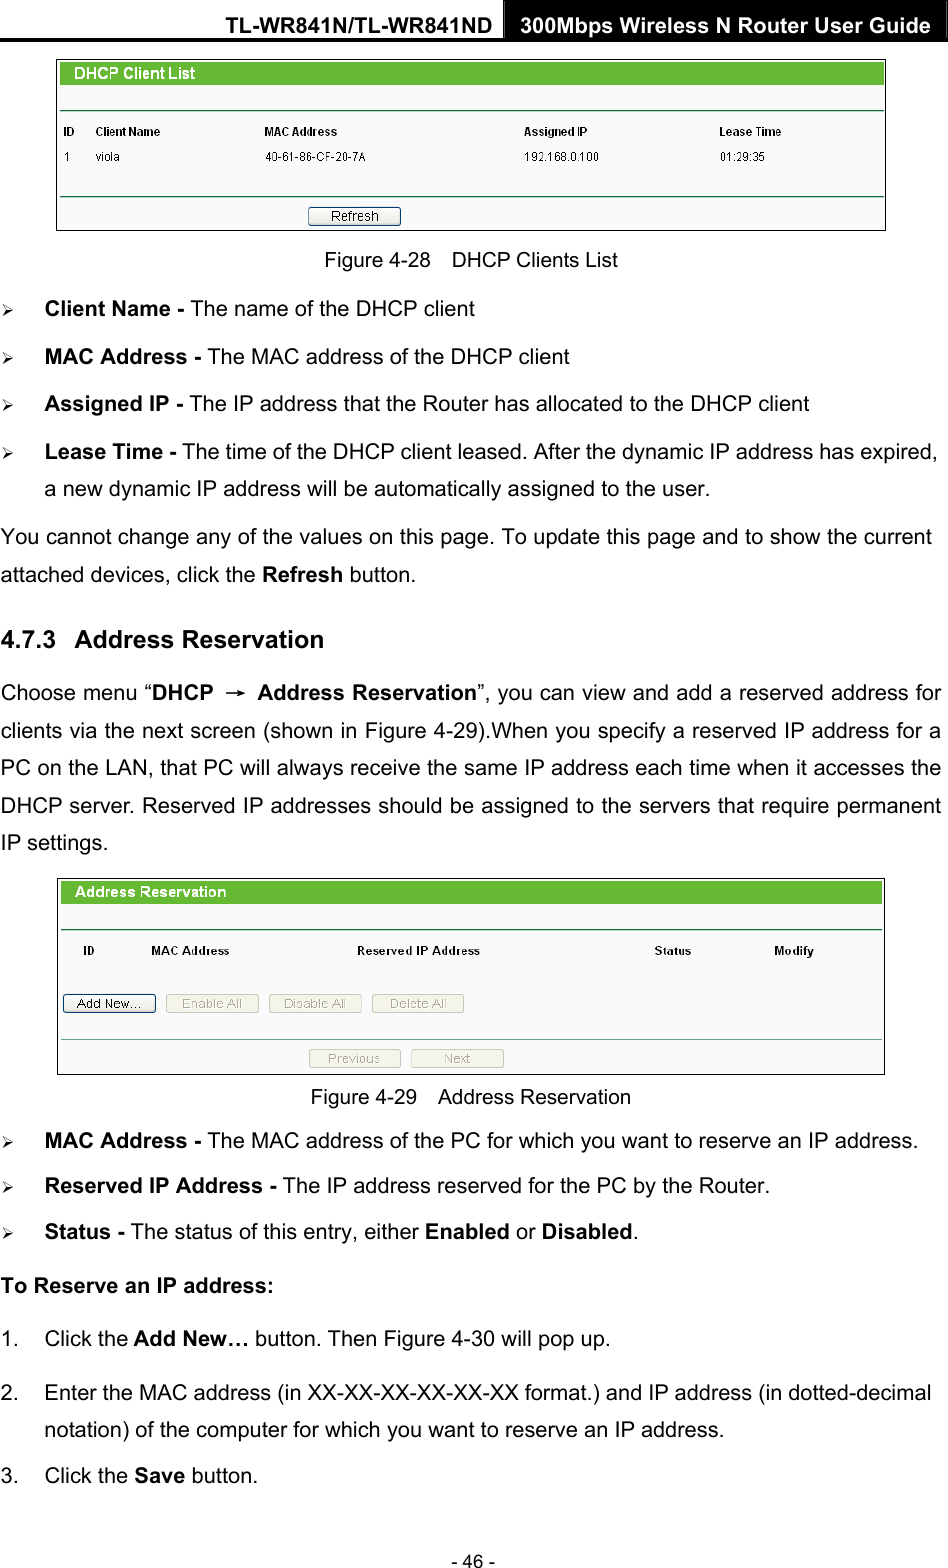 TL-WR841N/TL-WR841ND 300Mbps Wireless N Router User Guide - 46 -  Figure 4-28    DHCP Clients List ¾ Client Name - The name of the DHCP client   ¾ MAC Address - The MAC address of the DHCP client   ¾ Assigned IP - The IP address that the Router has allocated to the DHCP client ¾ Lease Time - The time of the DHCP client leased. After the dynamic IP address has expired, a new dynamic IP address will be automatically assigned to the user.     You cannot change any of the values on this page. To update this page and to show the current attached devices, click the Refresh button. 4.7.3  Address Reservation Choose menu “DHCP  → Address Reservation”, you can view and add a reserved address for clients via the next screen (shown in Figure 4-29).When you specify a reserved IP address for a PC on the LAN, that PC will always receive the same IP address each time when it accesses the DHCP server. Reserved IP addresses should be assigned to the servers that require permanent IP settings.    Figure 4-29  Address Reservation ¾ MAC Address - The MAC address of the PC for which you want to reserve an IP address. ¾ Reserved IP Address - The IP address reserved for the PC by the Router. ¾ Status - The status of this entry, either Enabled or Disabled. To Reserve an IP address:  1. Click the Add New… button. Then Figure 4-30 will pop up. 2.  Enter the MAC address (in XX-XX-XX-XX-XX-XX format.) and IP address (in dotted-decimal notation) of the computer for which you want to reserve an IP address.   3. Click the Save button.   